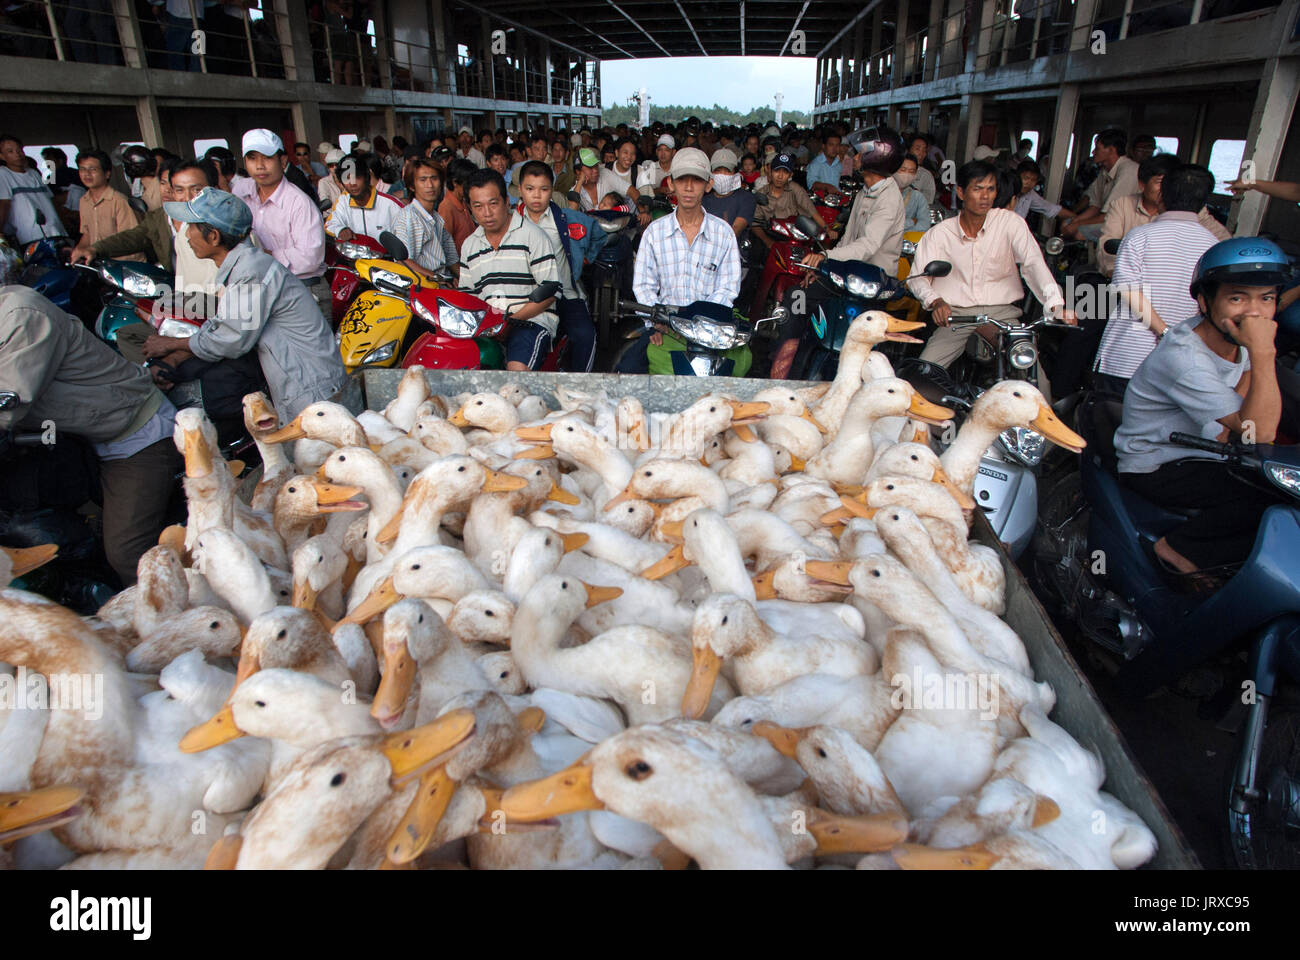 A lot of ducks on the public ferry to cross the Long Vinh Co Chien River. Mekong Delta. Stock Photo